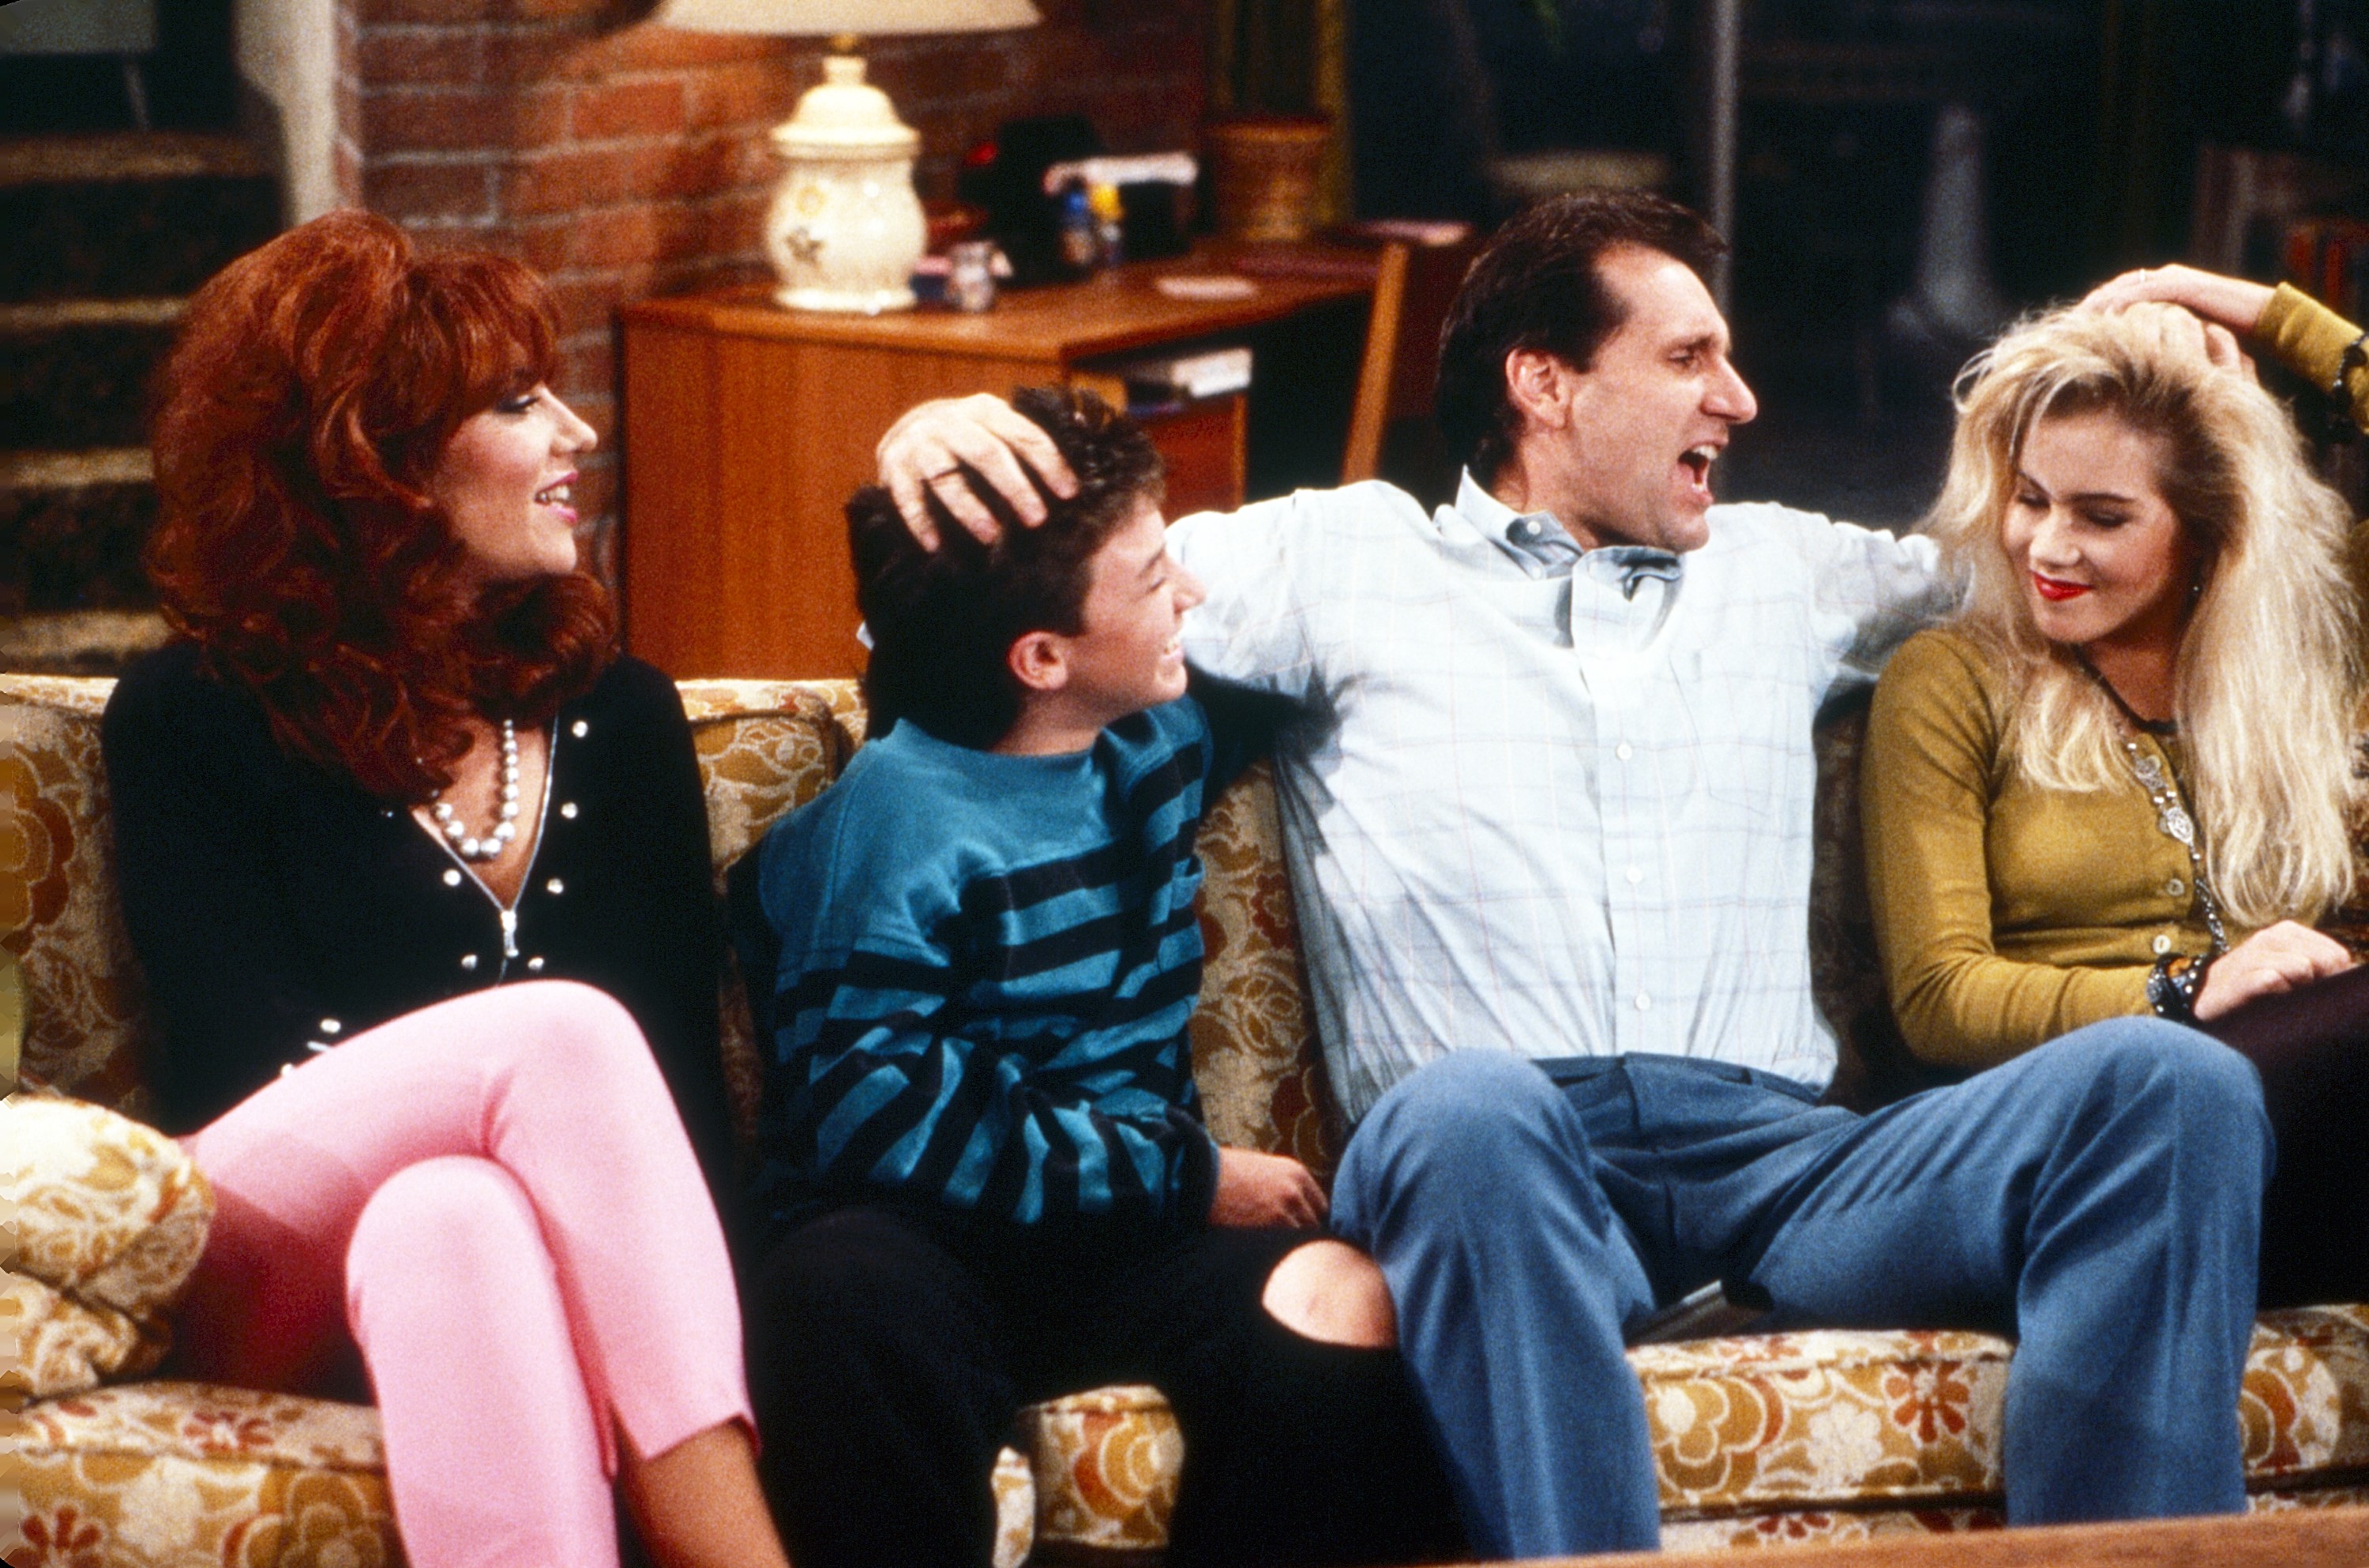 The cast of Married With Children.